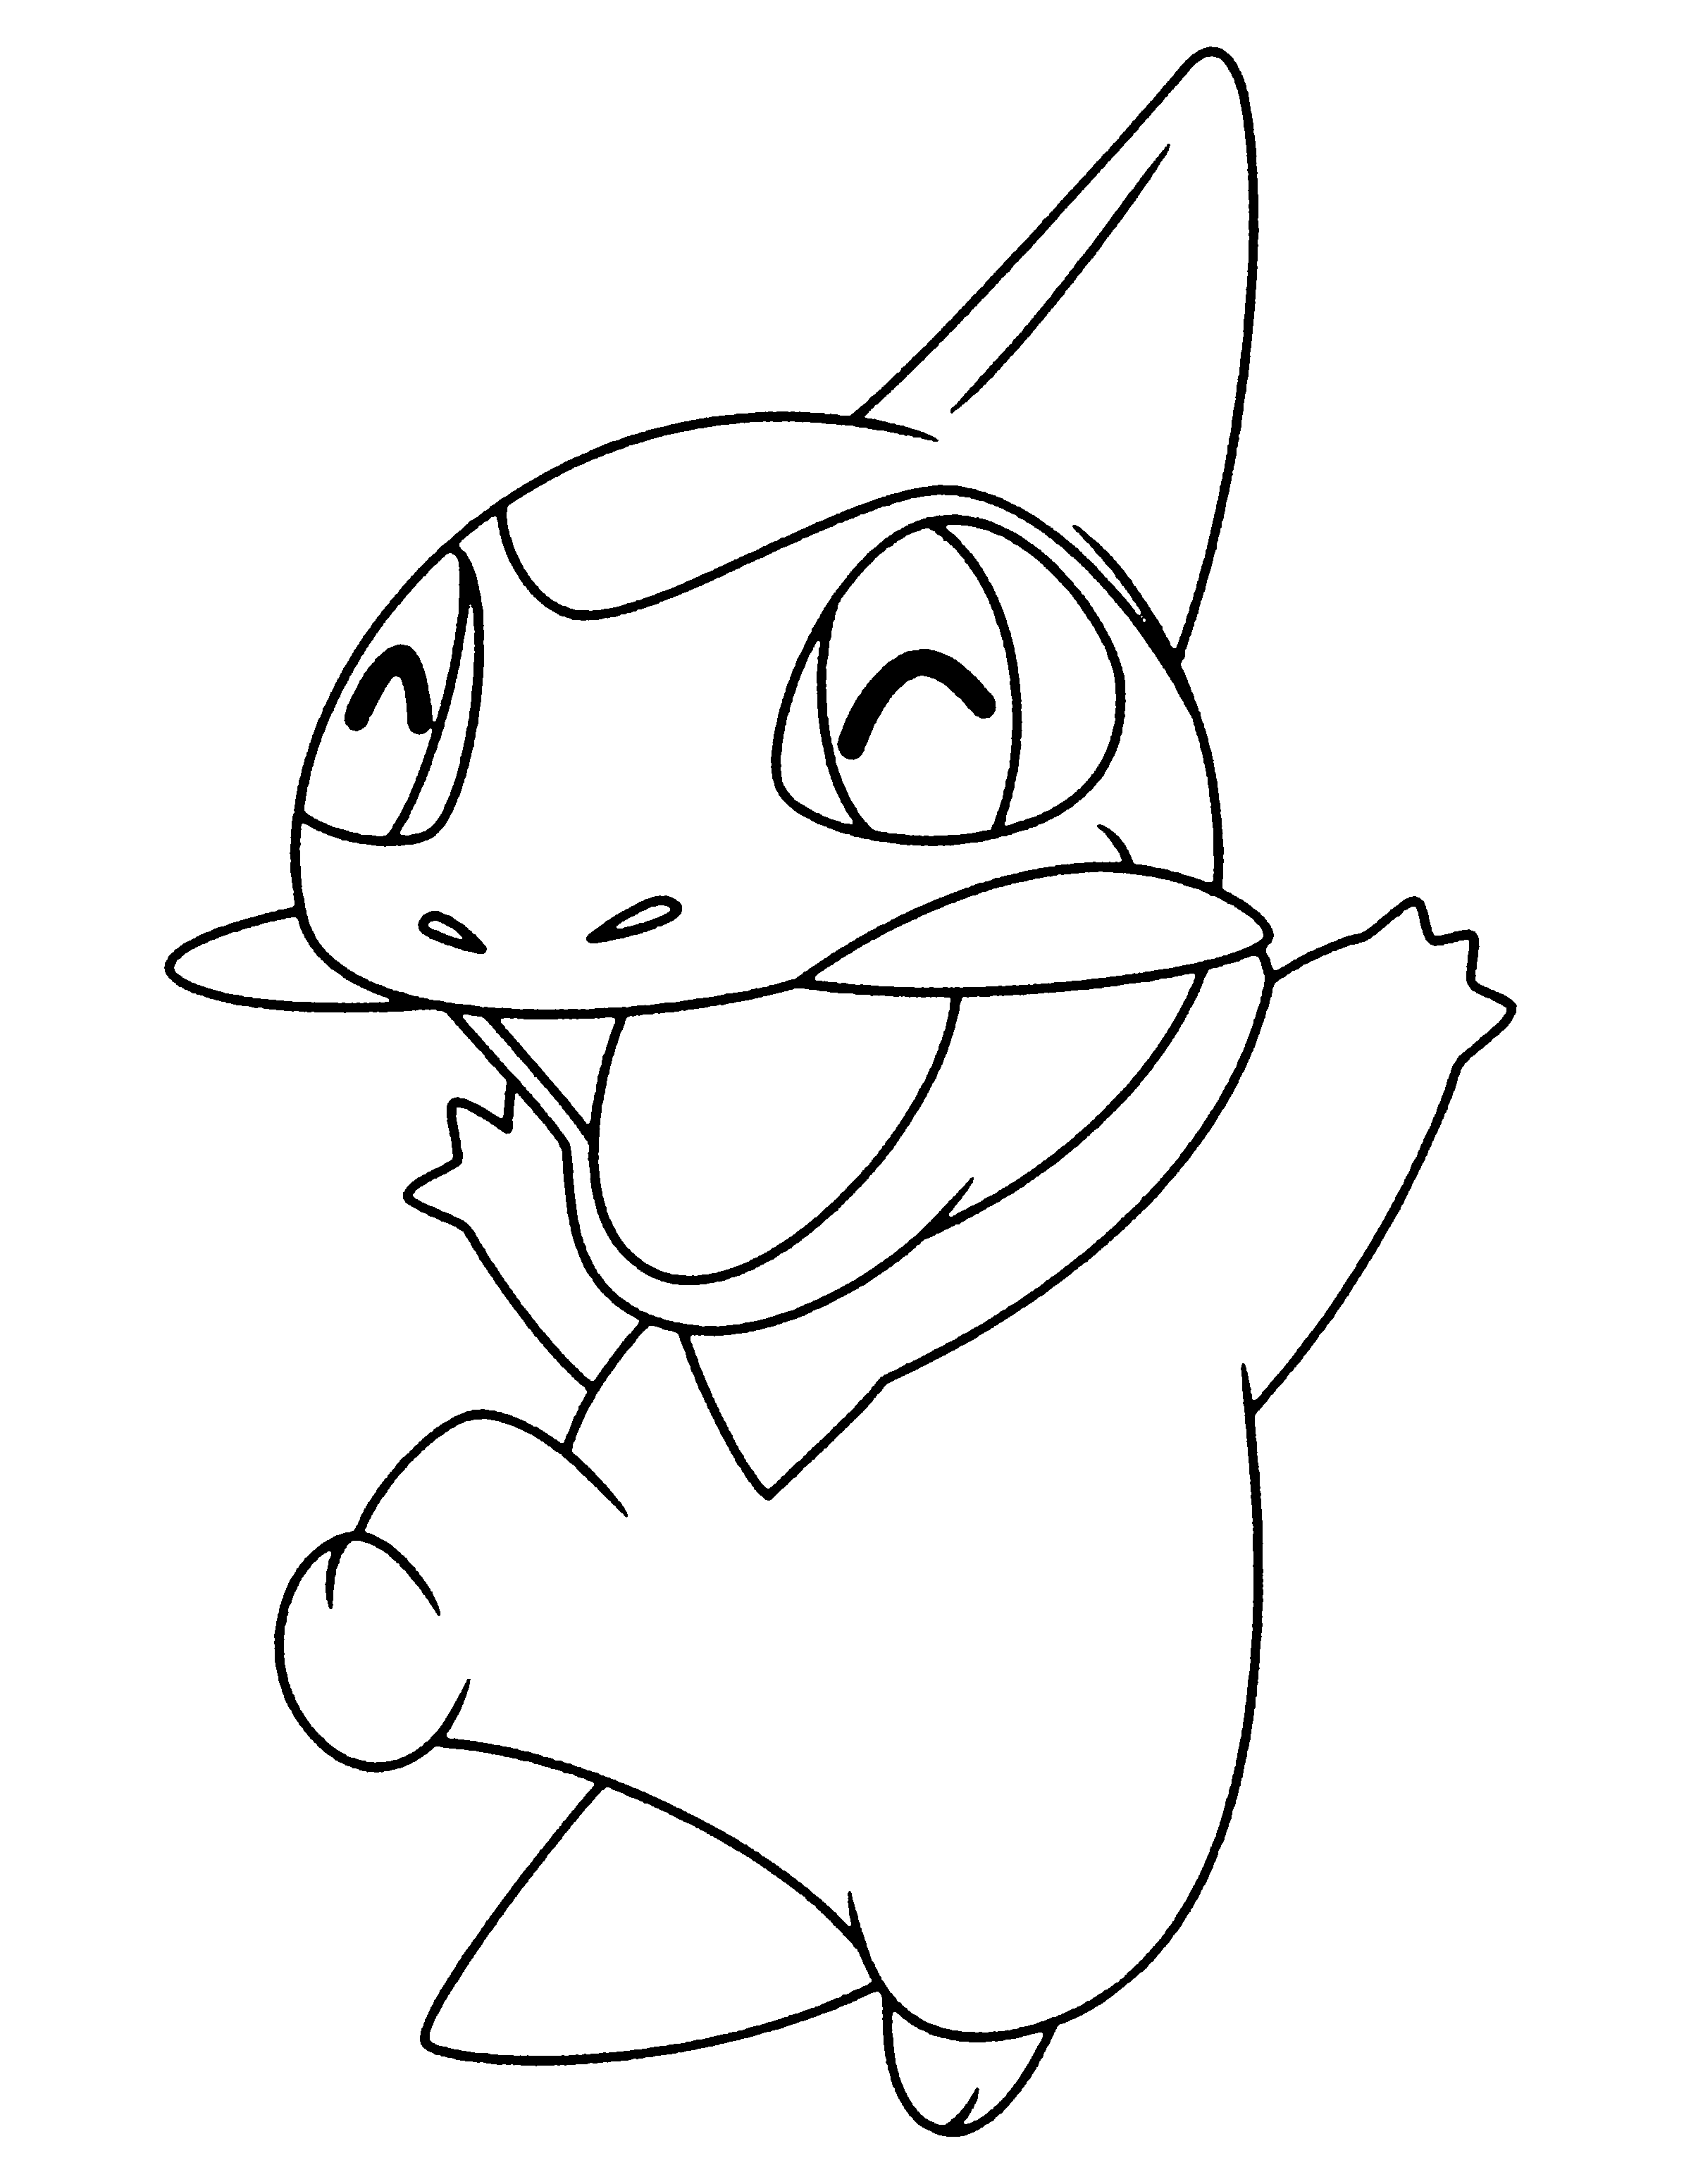 Pokemon Axew Coloring Pages - Coloring Home